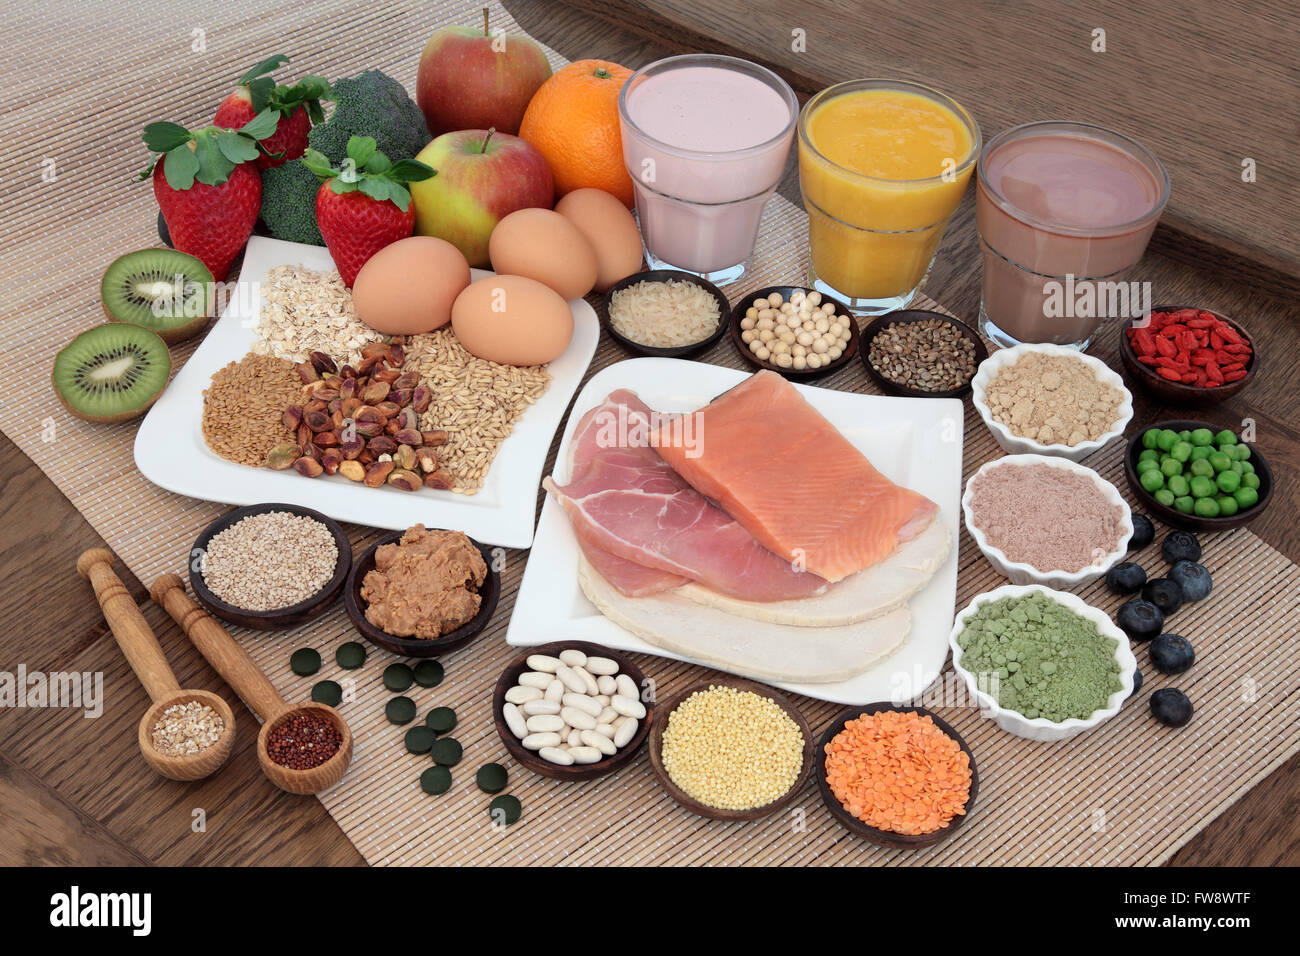 Health and body building food with fish and meat, supplement powders, vitamin tablets, veg, fruit and juice smoothie shakes. Stock Photo